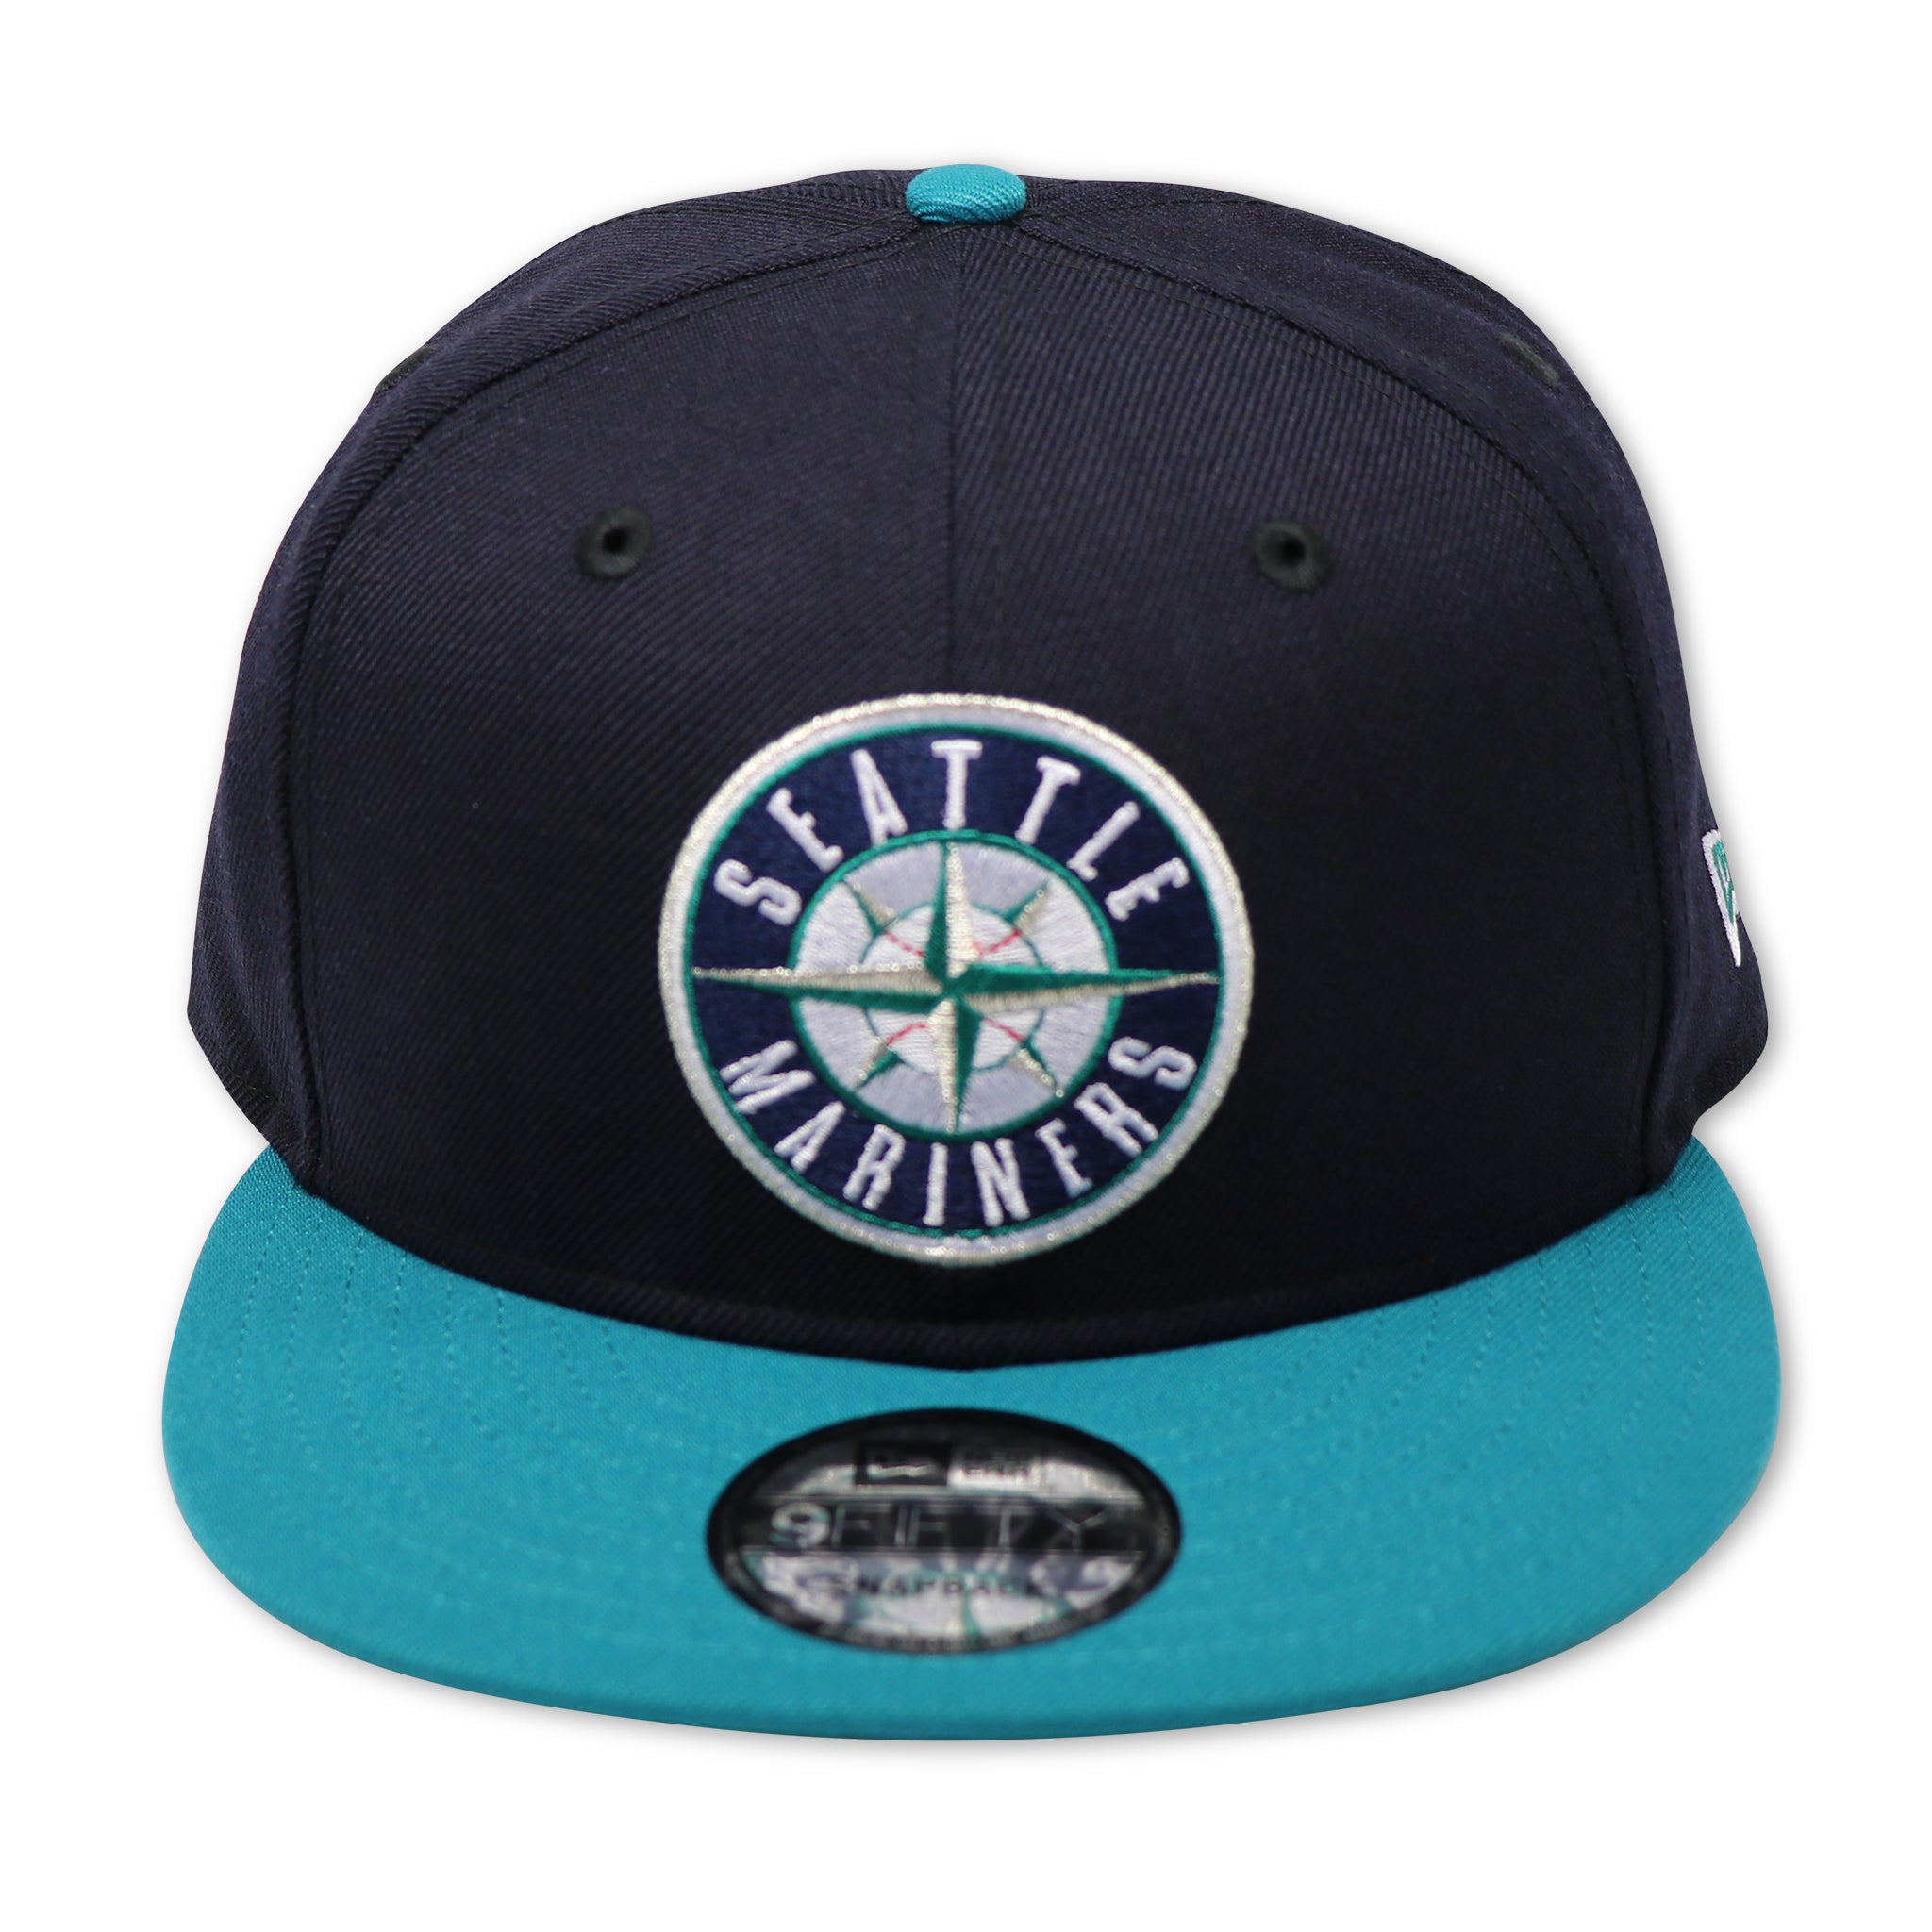 Seattle Mariners Cooperstown Mitchell & Ness MLB Baseball Snapback Hat Cap